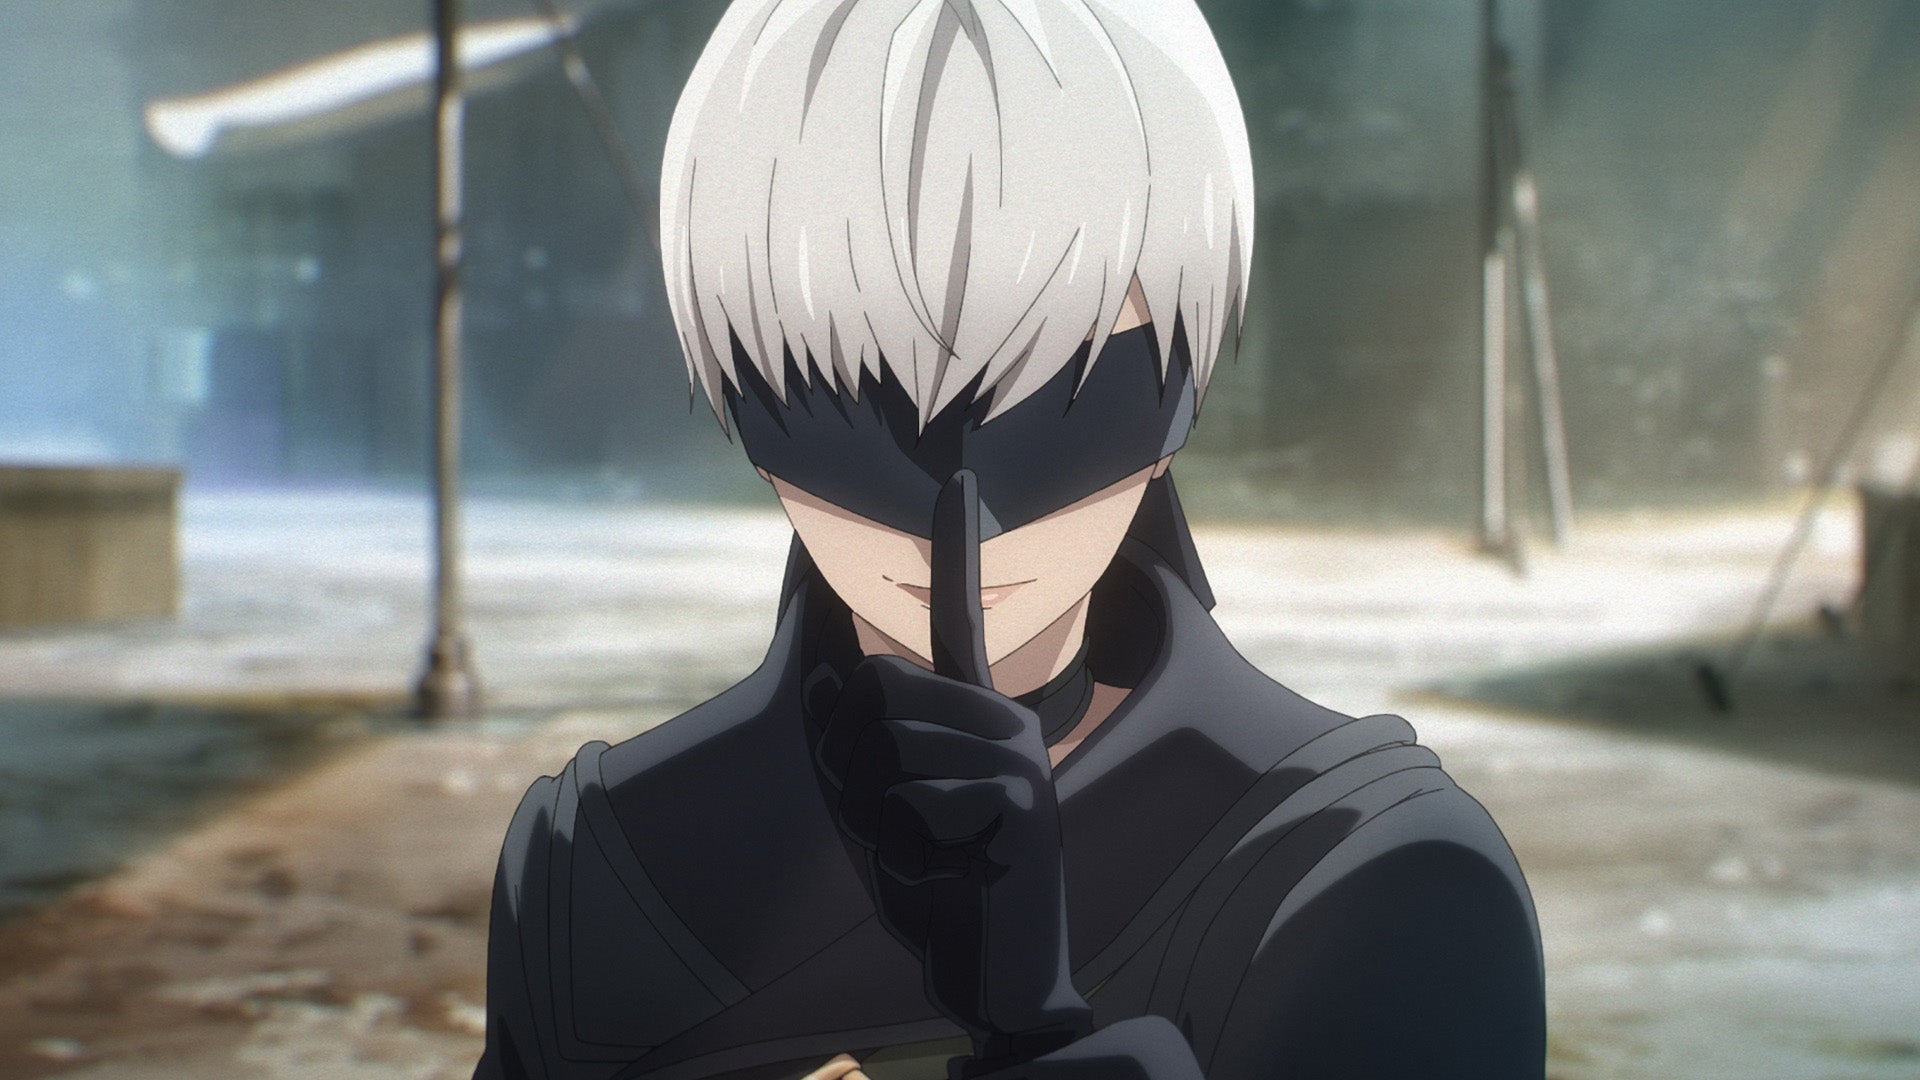 NieR: Automata' Ver1.1a Anime Review: 2B 'Or not to [B]e'?